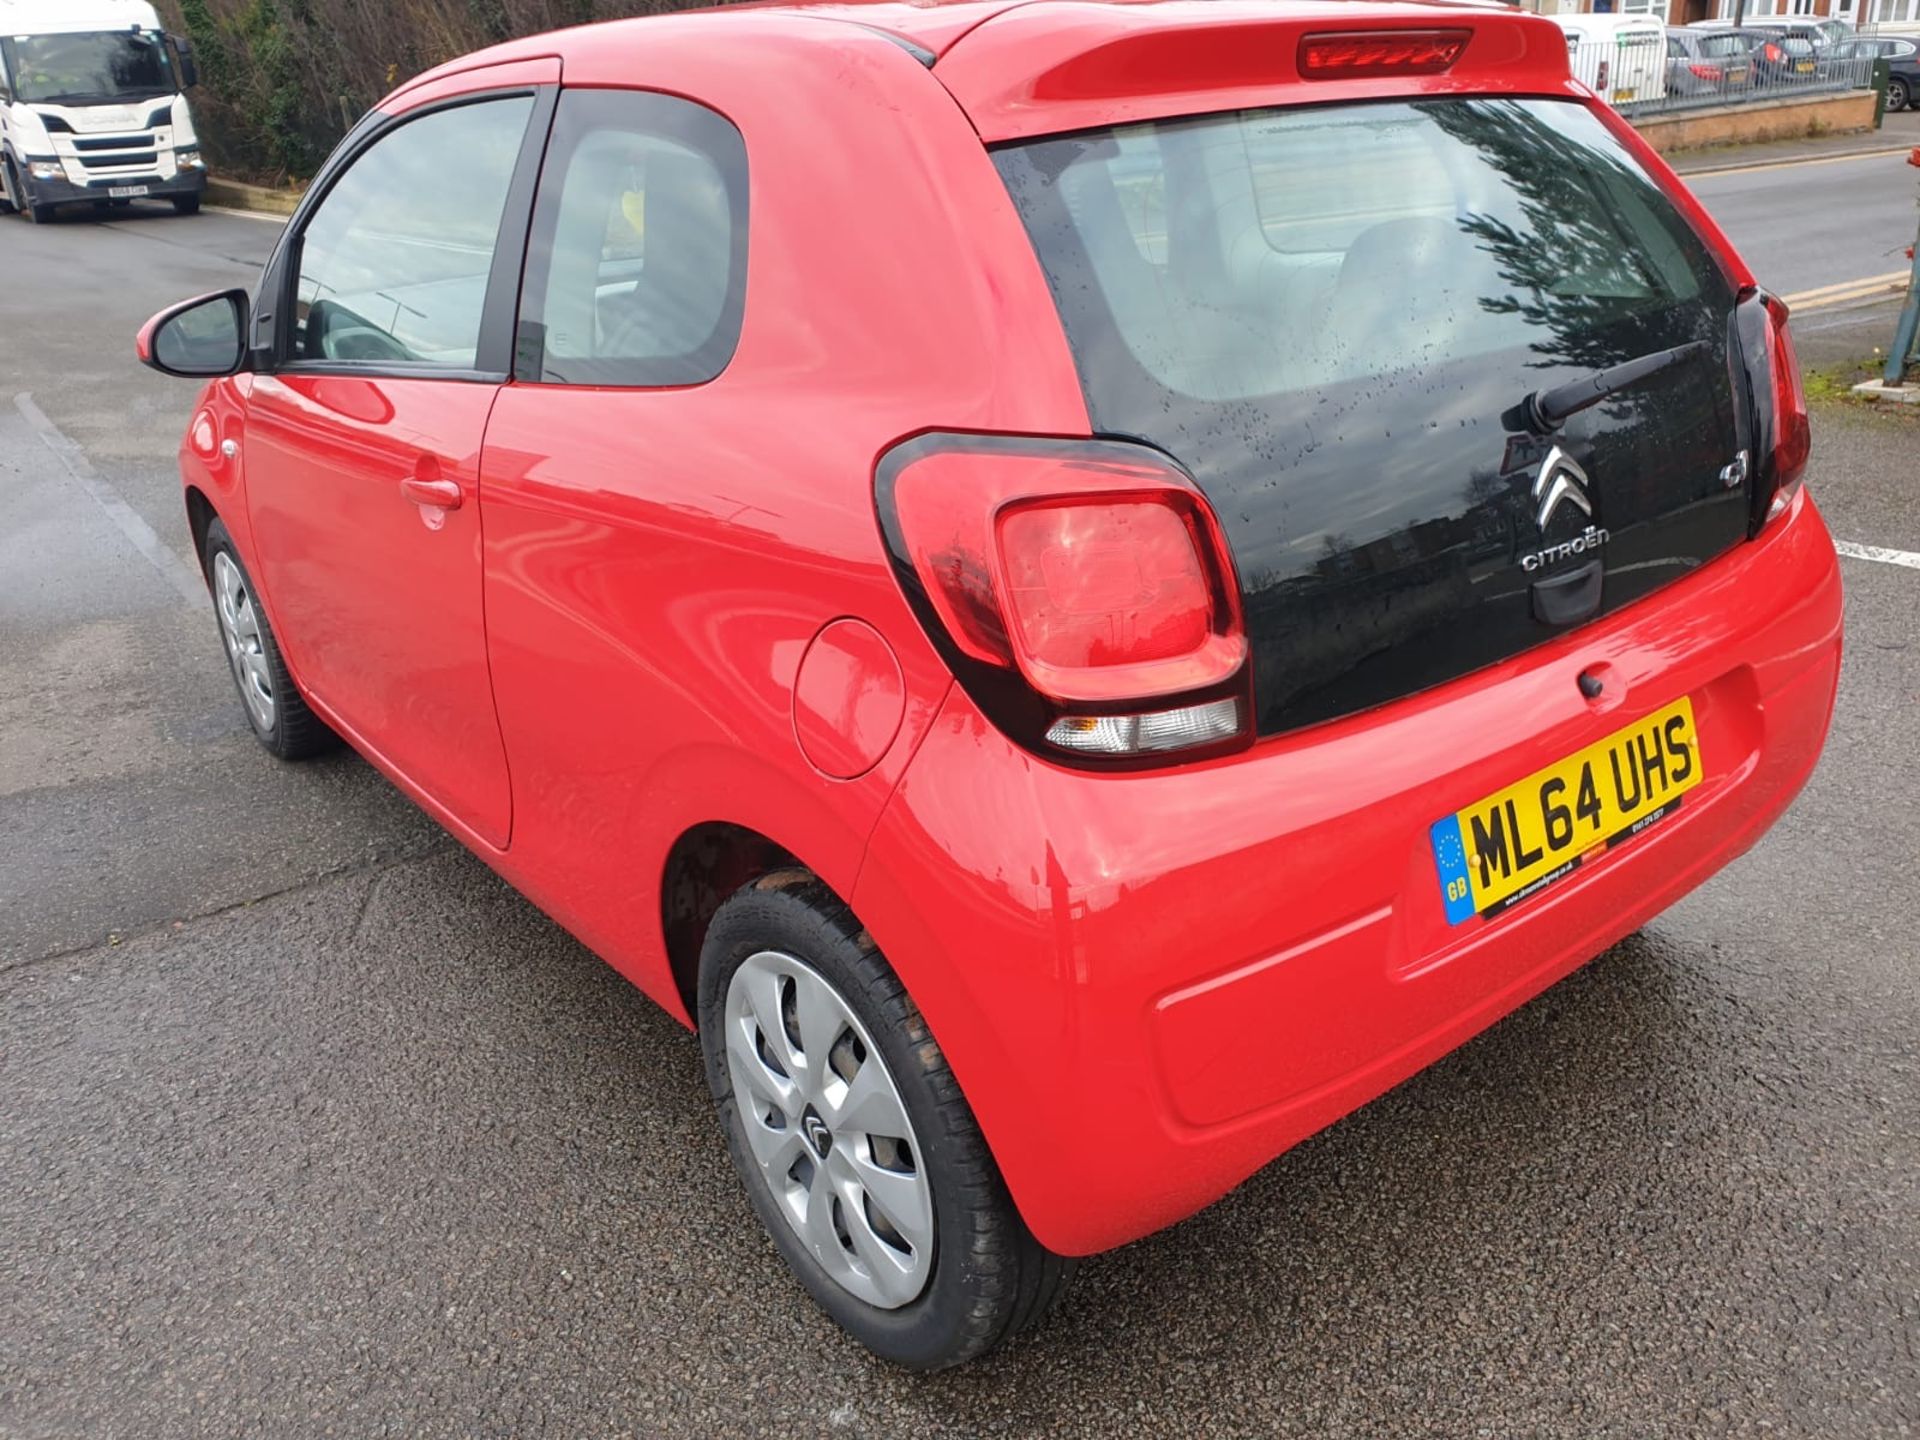 CITROEN C1 FEEL ML64 UHS COLLECTION LEICESTER - Image 5 of 10